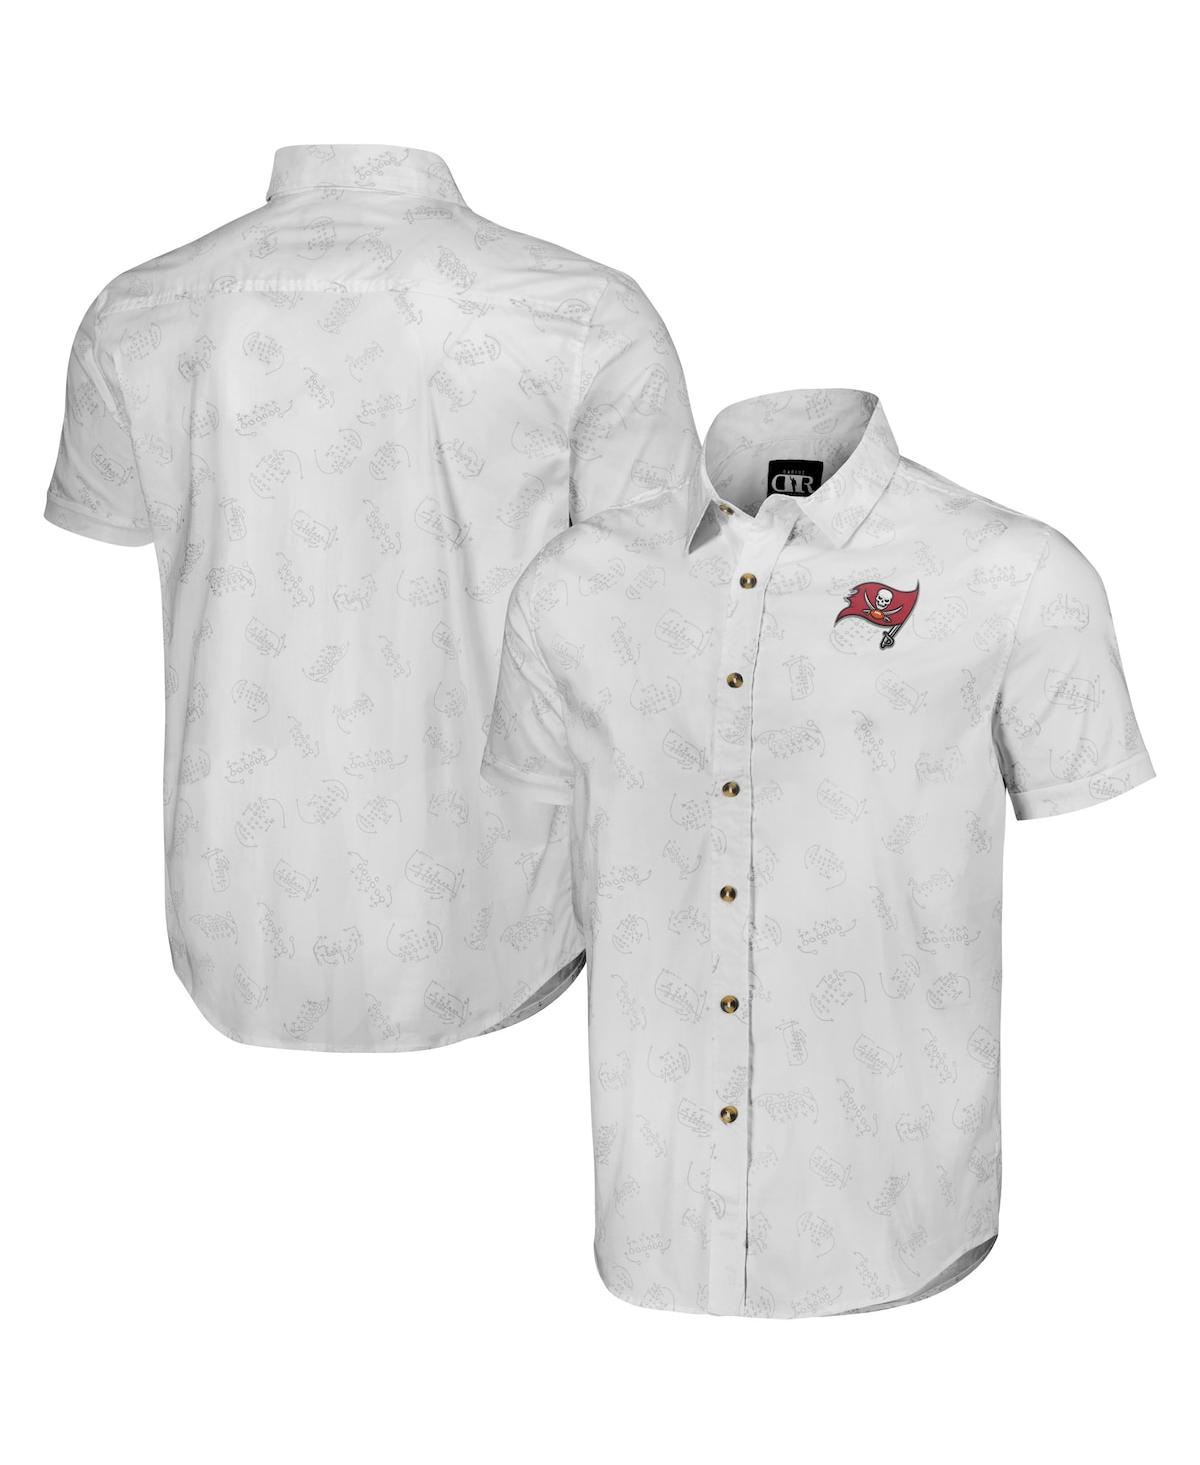 Fanatics Men's Nfl X Darius Rucker Collection By  White Tampa Bay Buccaneers Woven Short Sleeve Butto